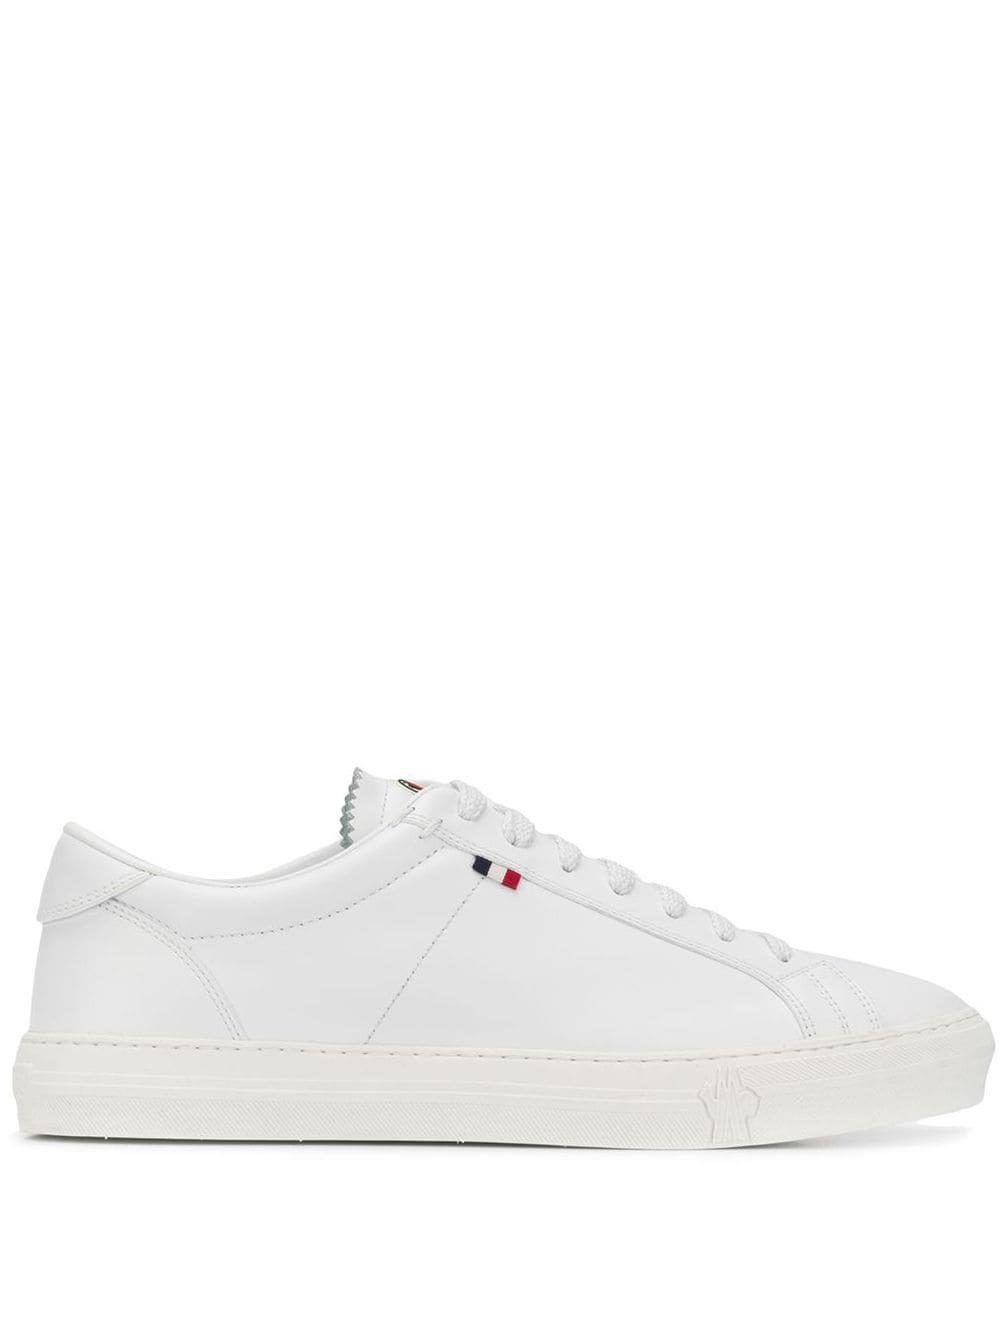 Moncler Leather New Monaco Scarpa Sneakers in White for Men | Lyst